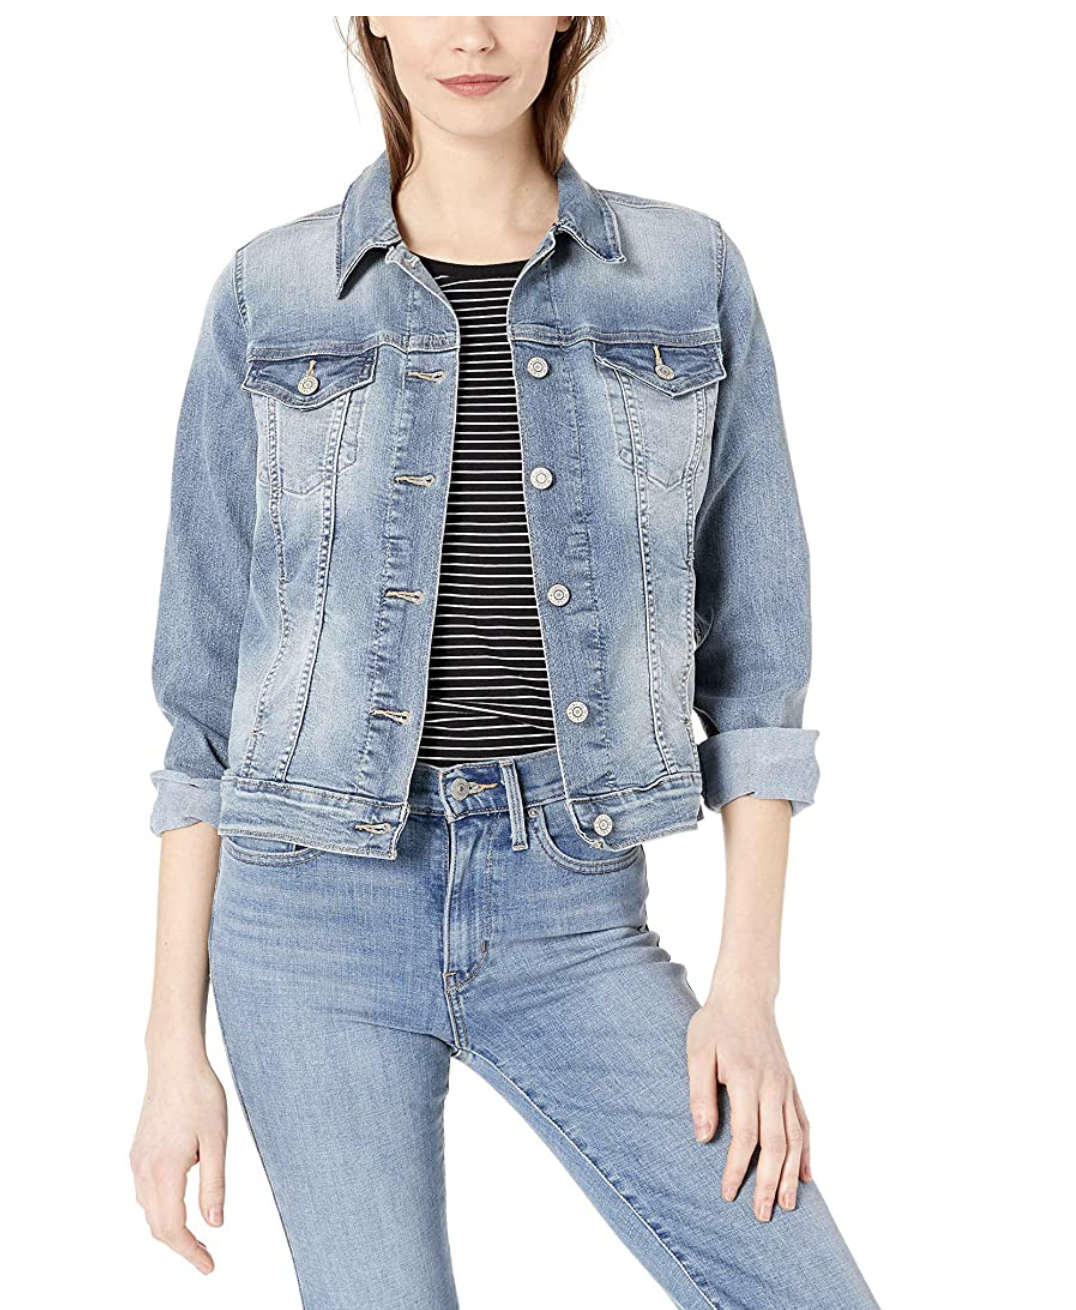 Levi’s Most Popular Styles On Sale: Don’t Miss These Amazon Deals ...